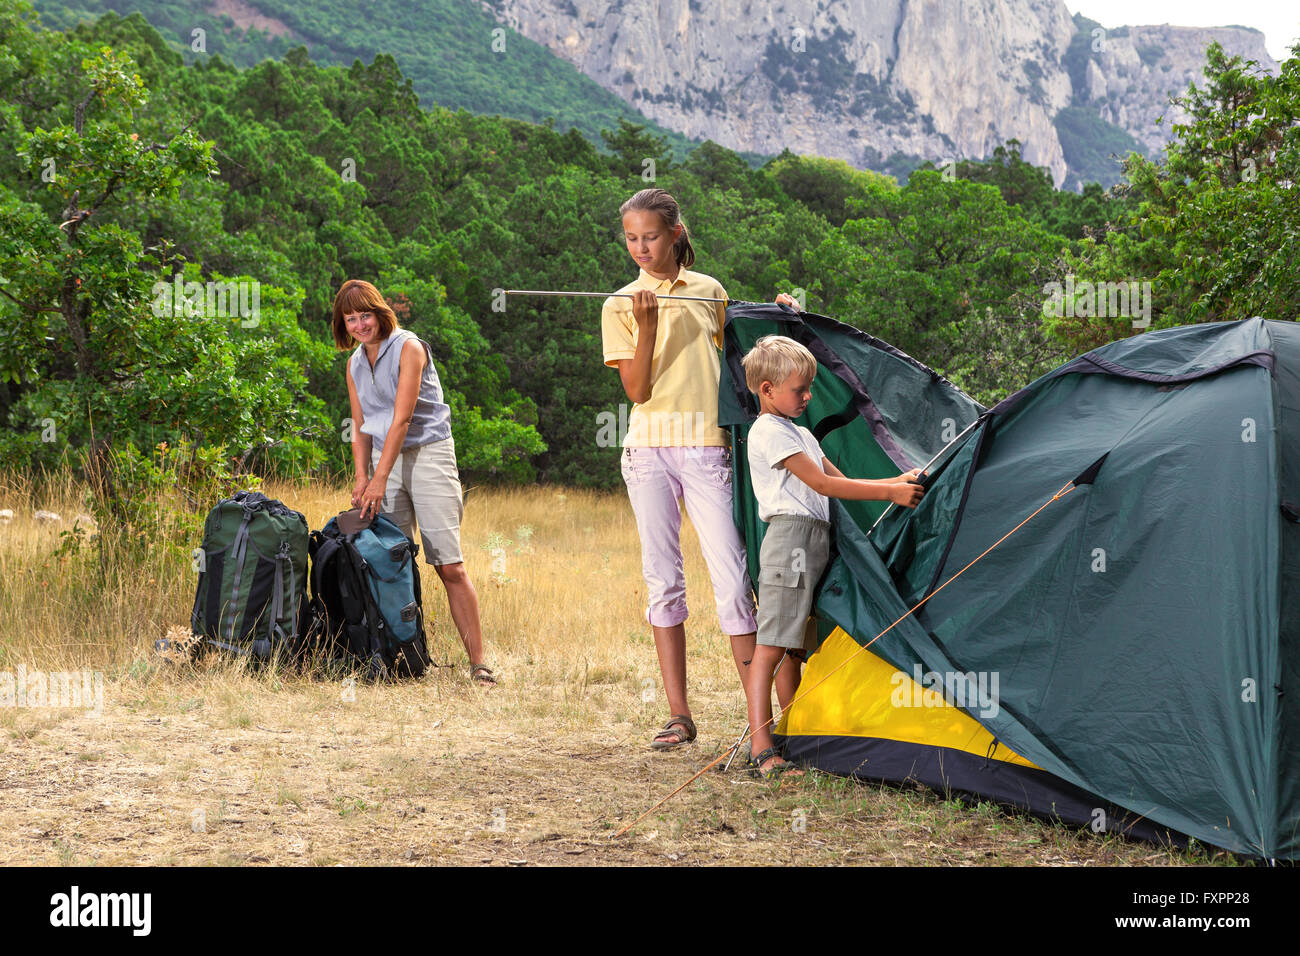 Family setting a tent Stock Photo